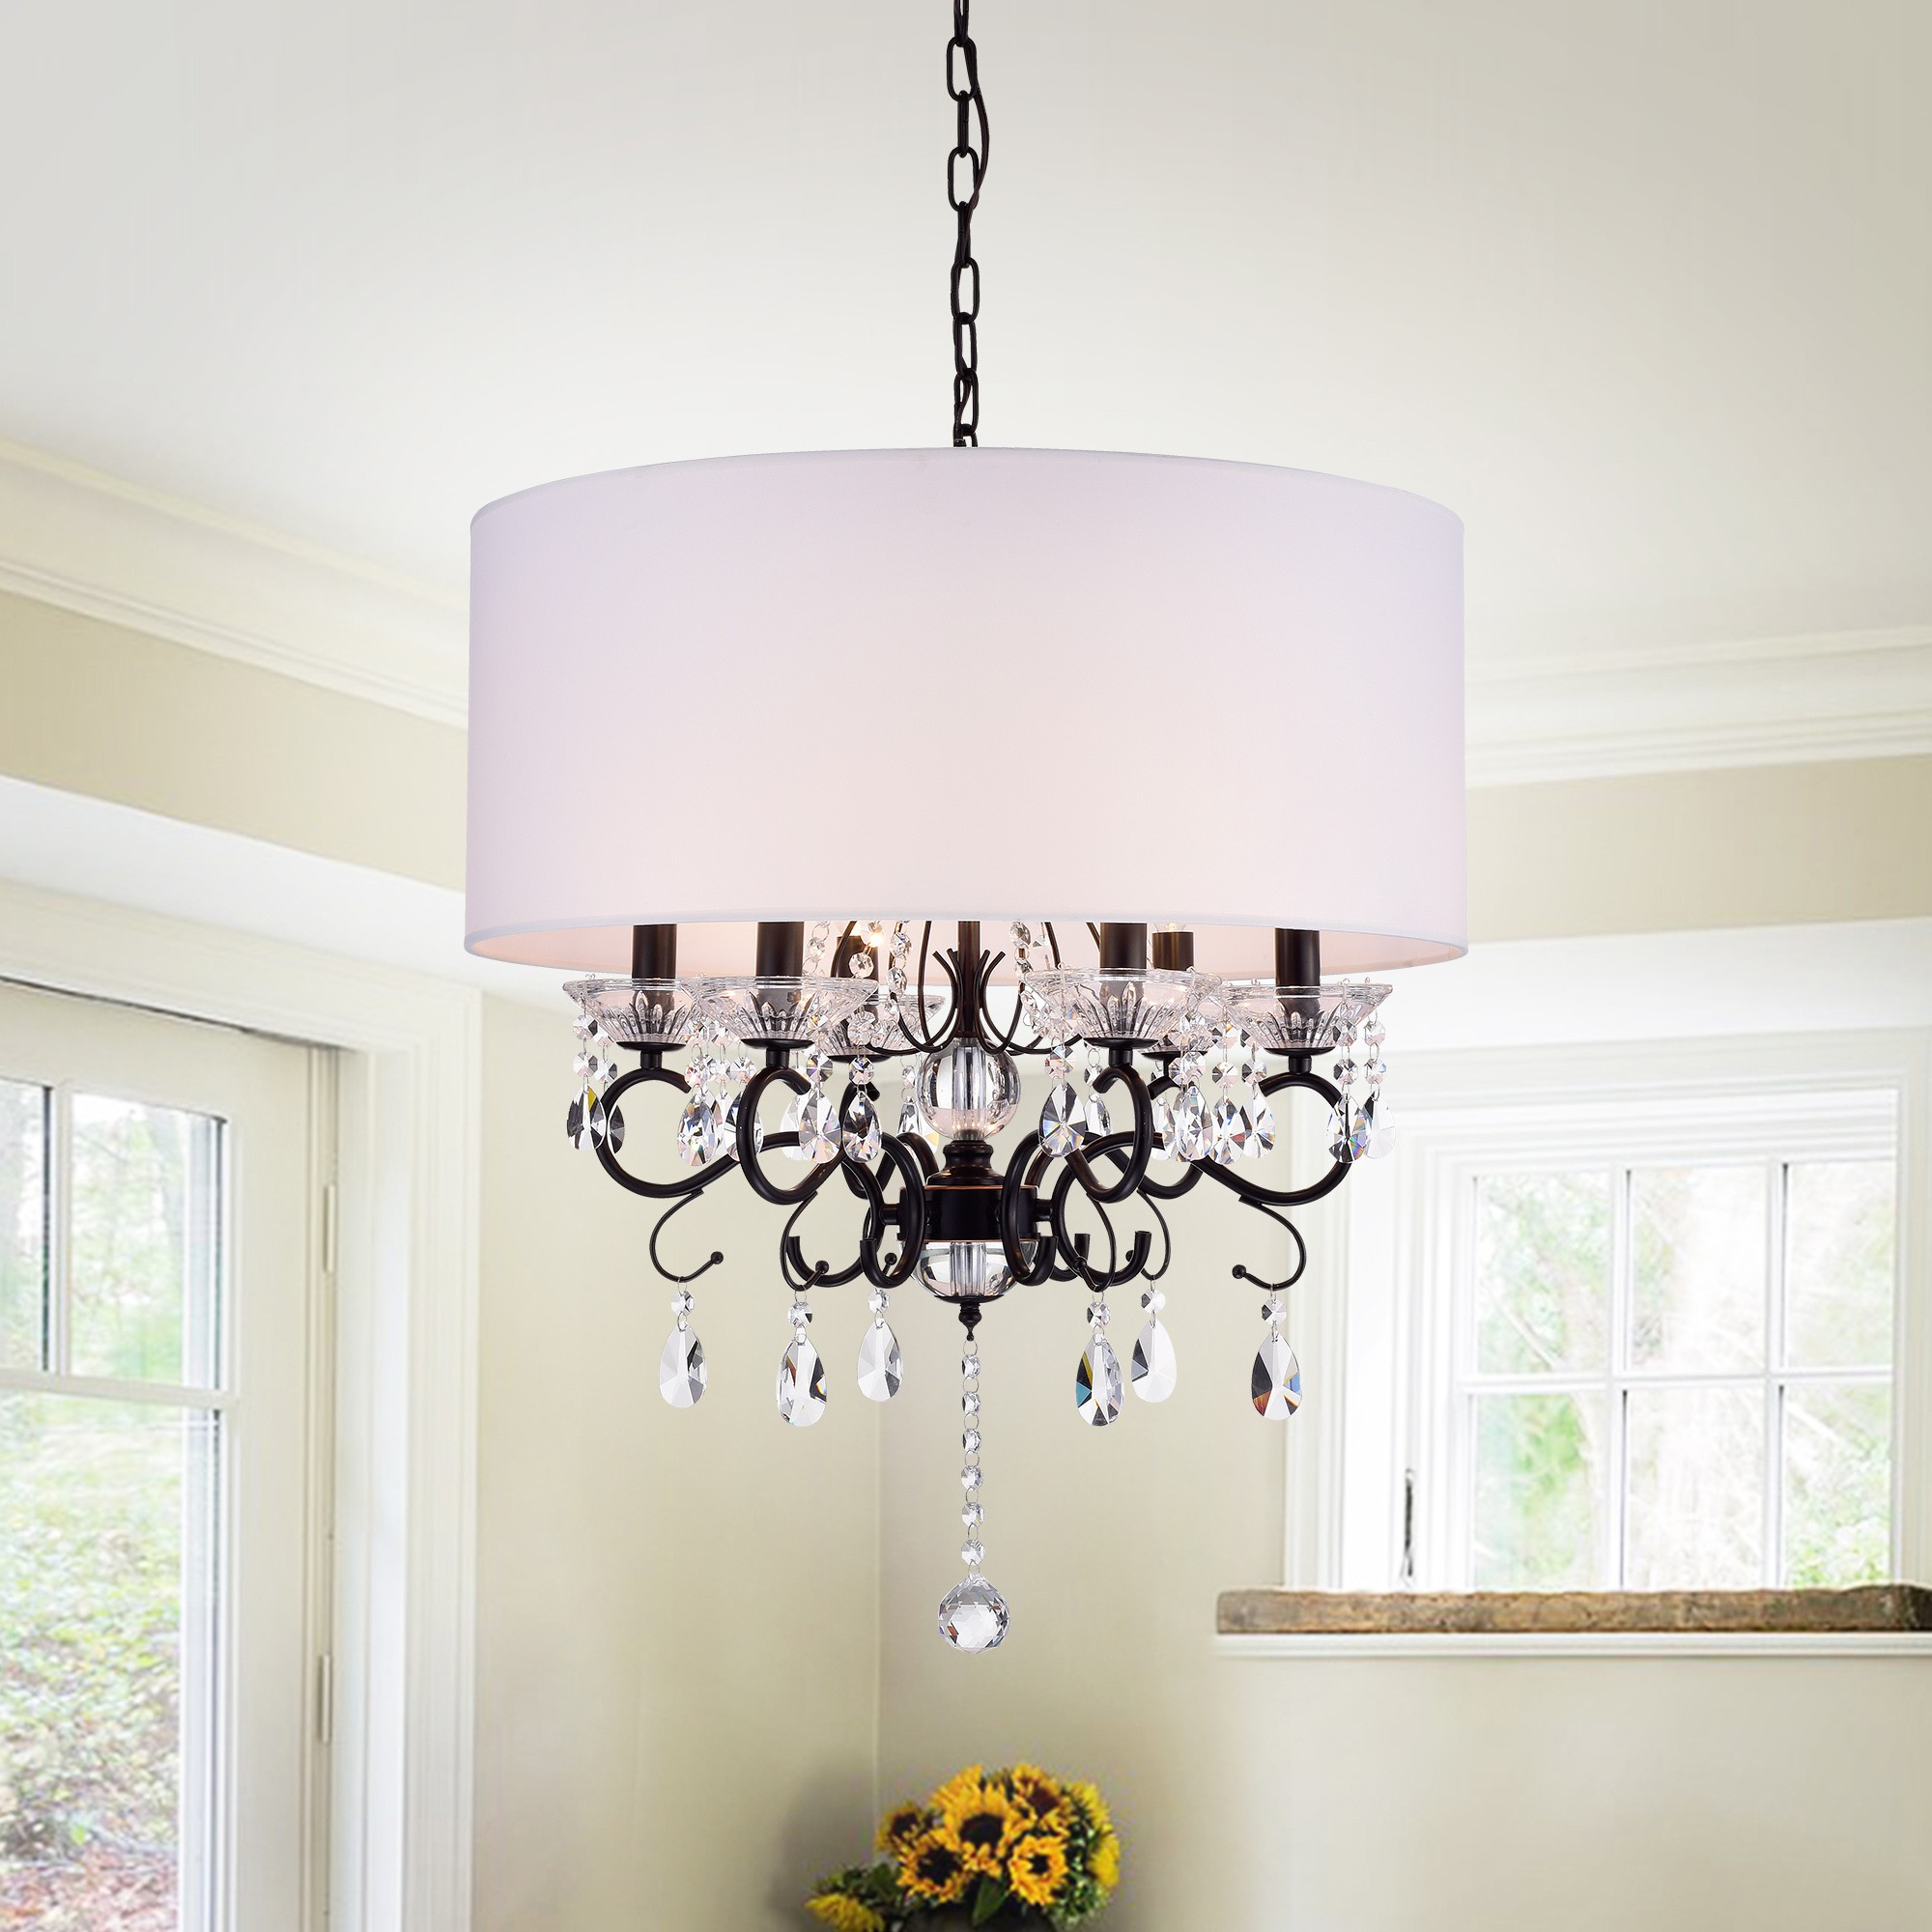 Warehouse of Tiffany Ninian Oiled-rubbed Bronze Crystal/Metal 6-light Chandelier with Fabric Drum Shade